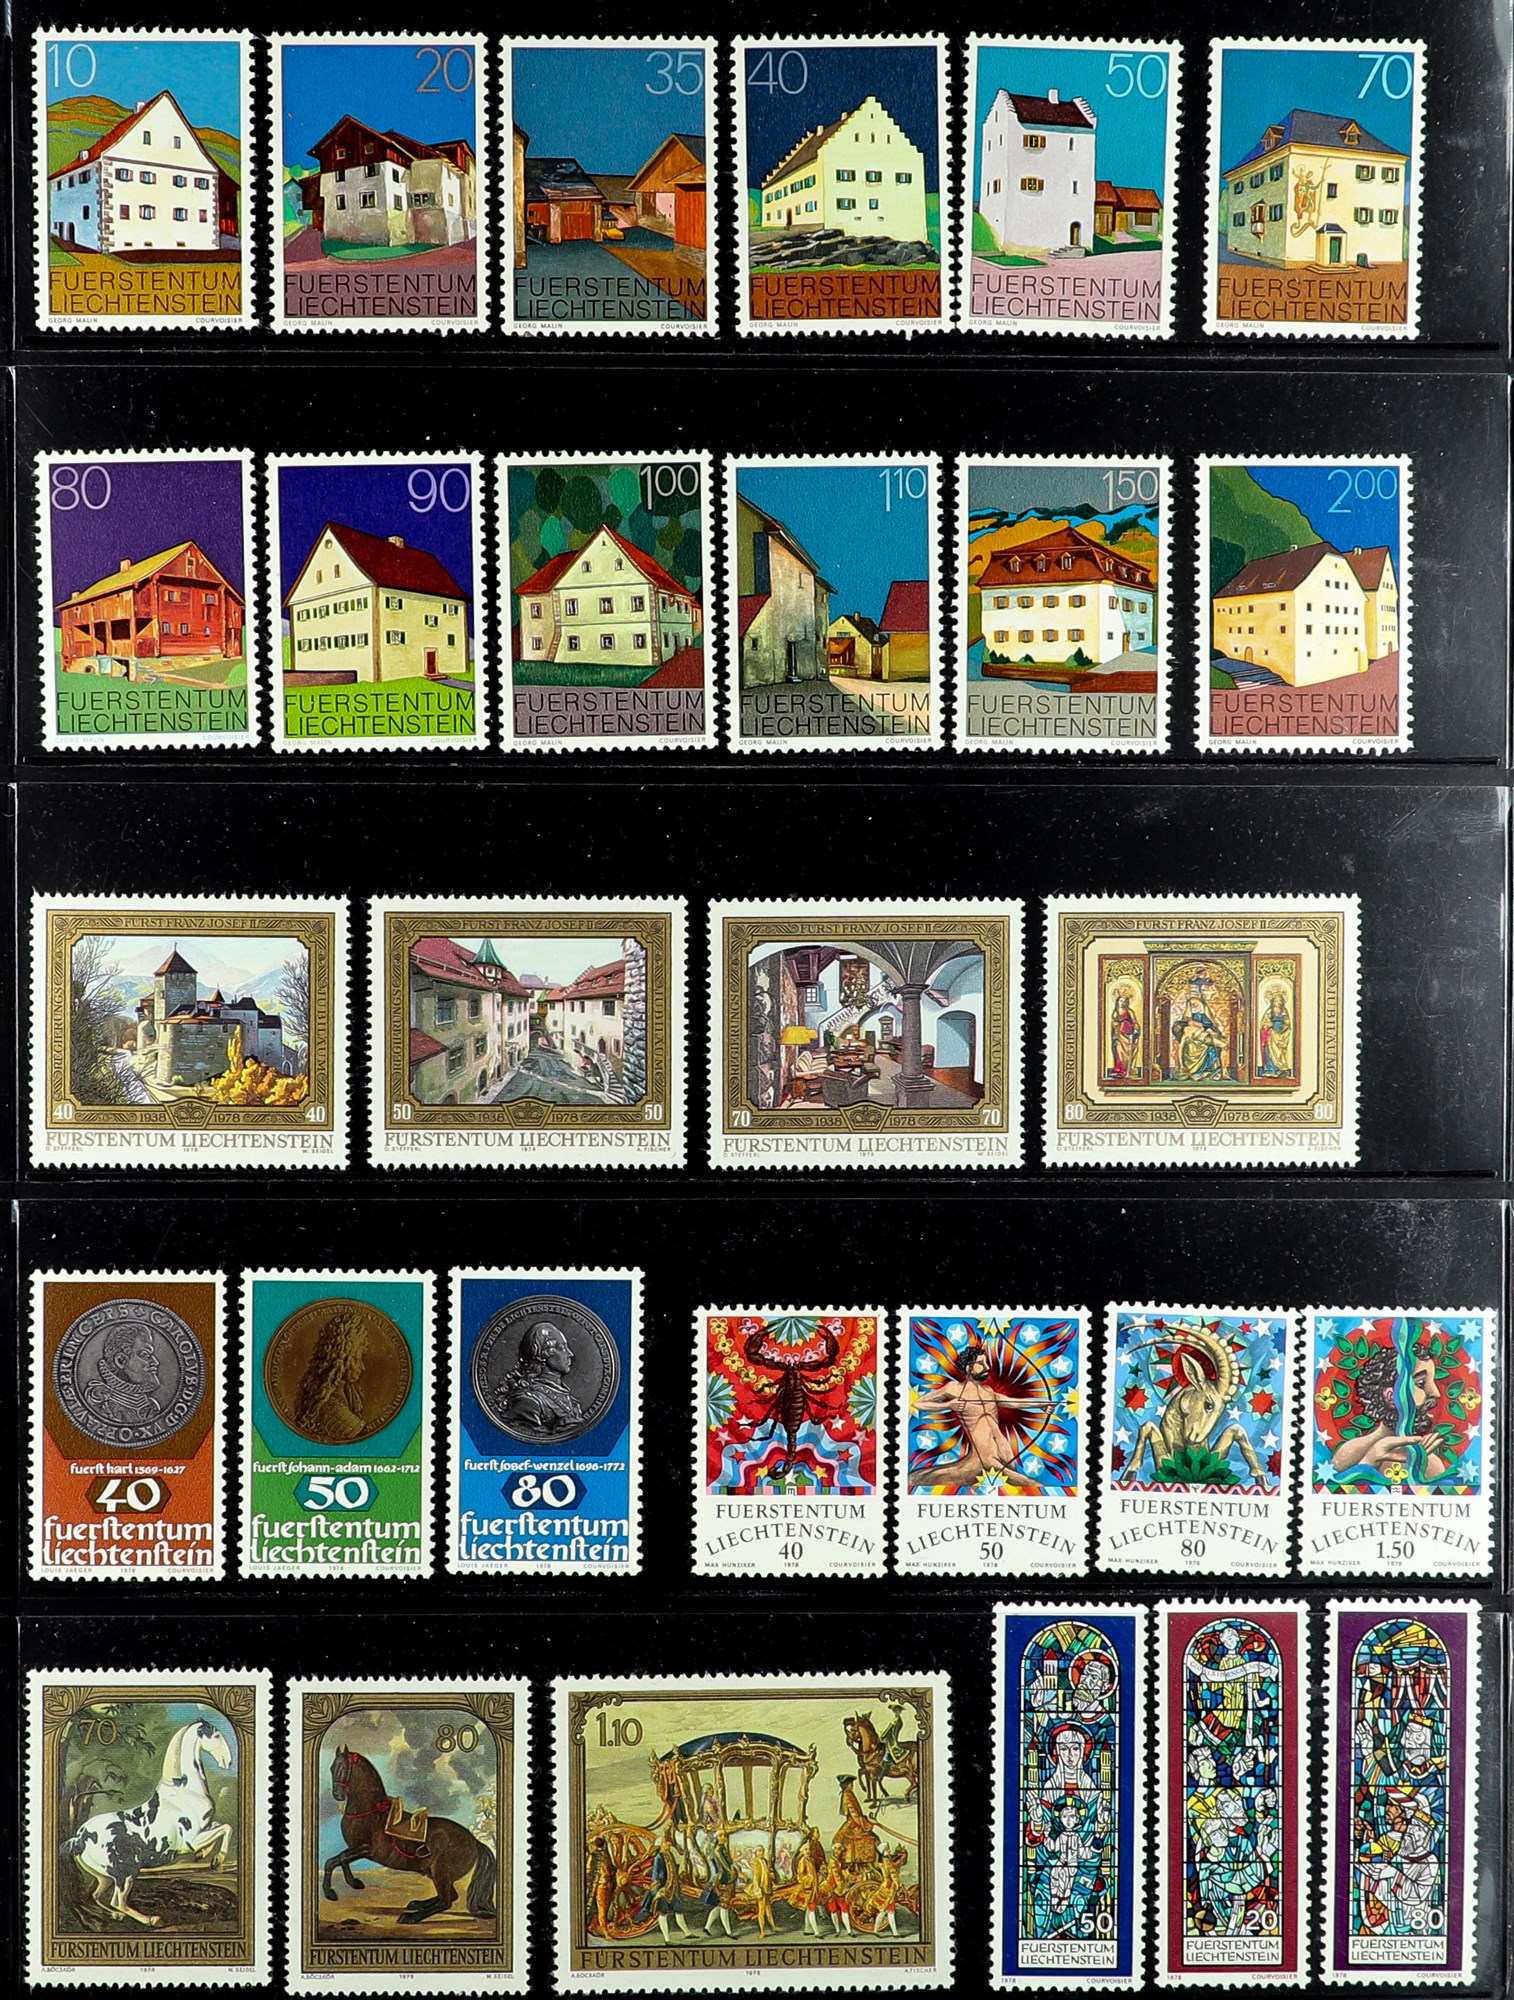 LIECHTENSTEIN 1938 - 1993 COLLECTION of 650+ never hinged mint stamps & 15 miniature sheets on - Image 10 of 11